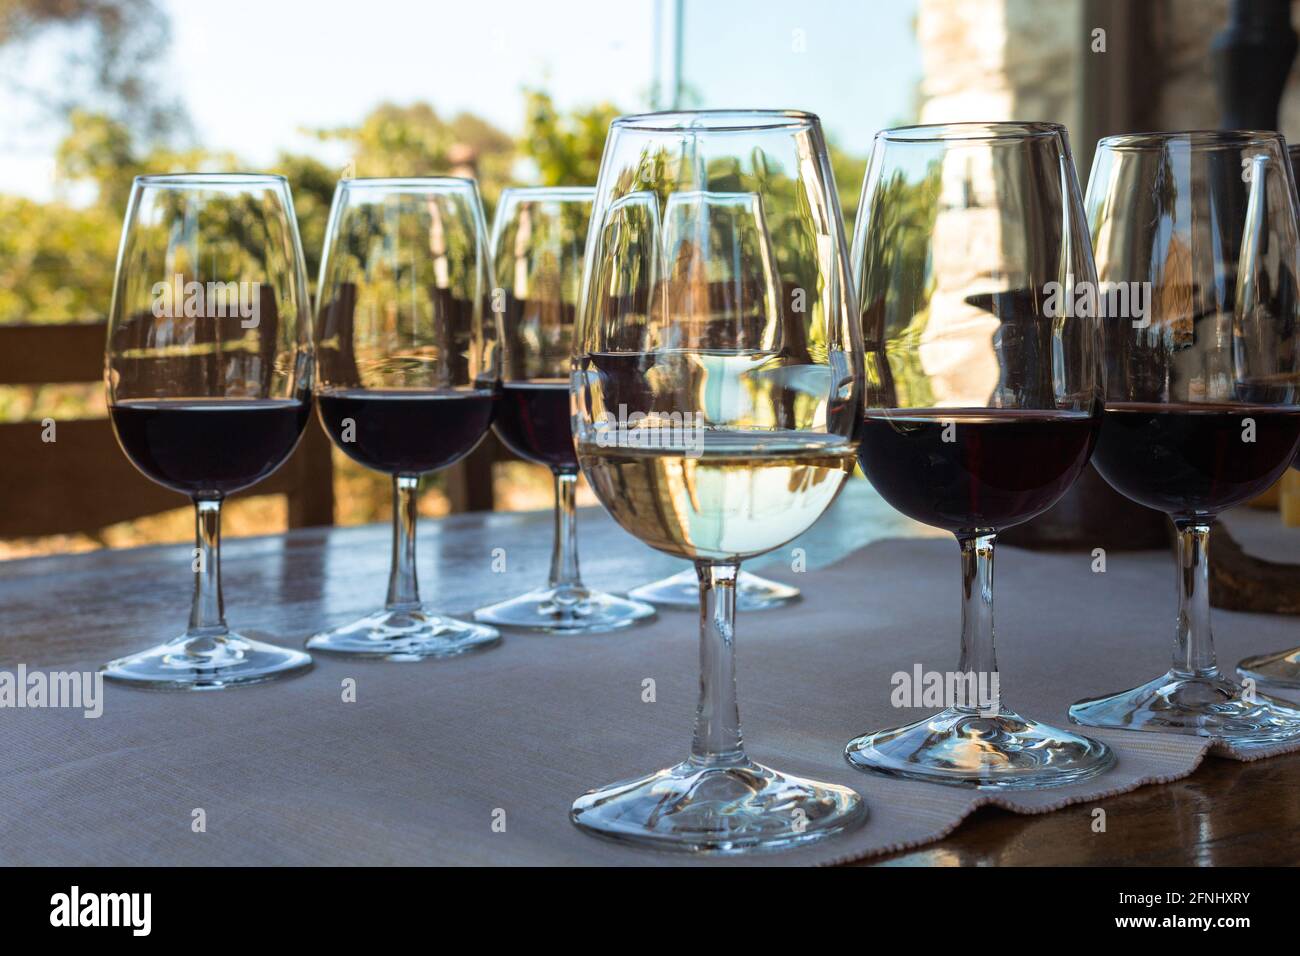 Close up view of wine glasses on table at wine tasting in Urla district of Izmir province in Turkey. It is a sunny summer day. Stock Photo